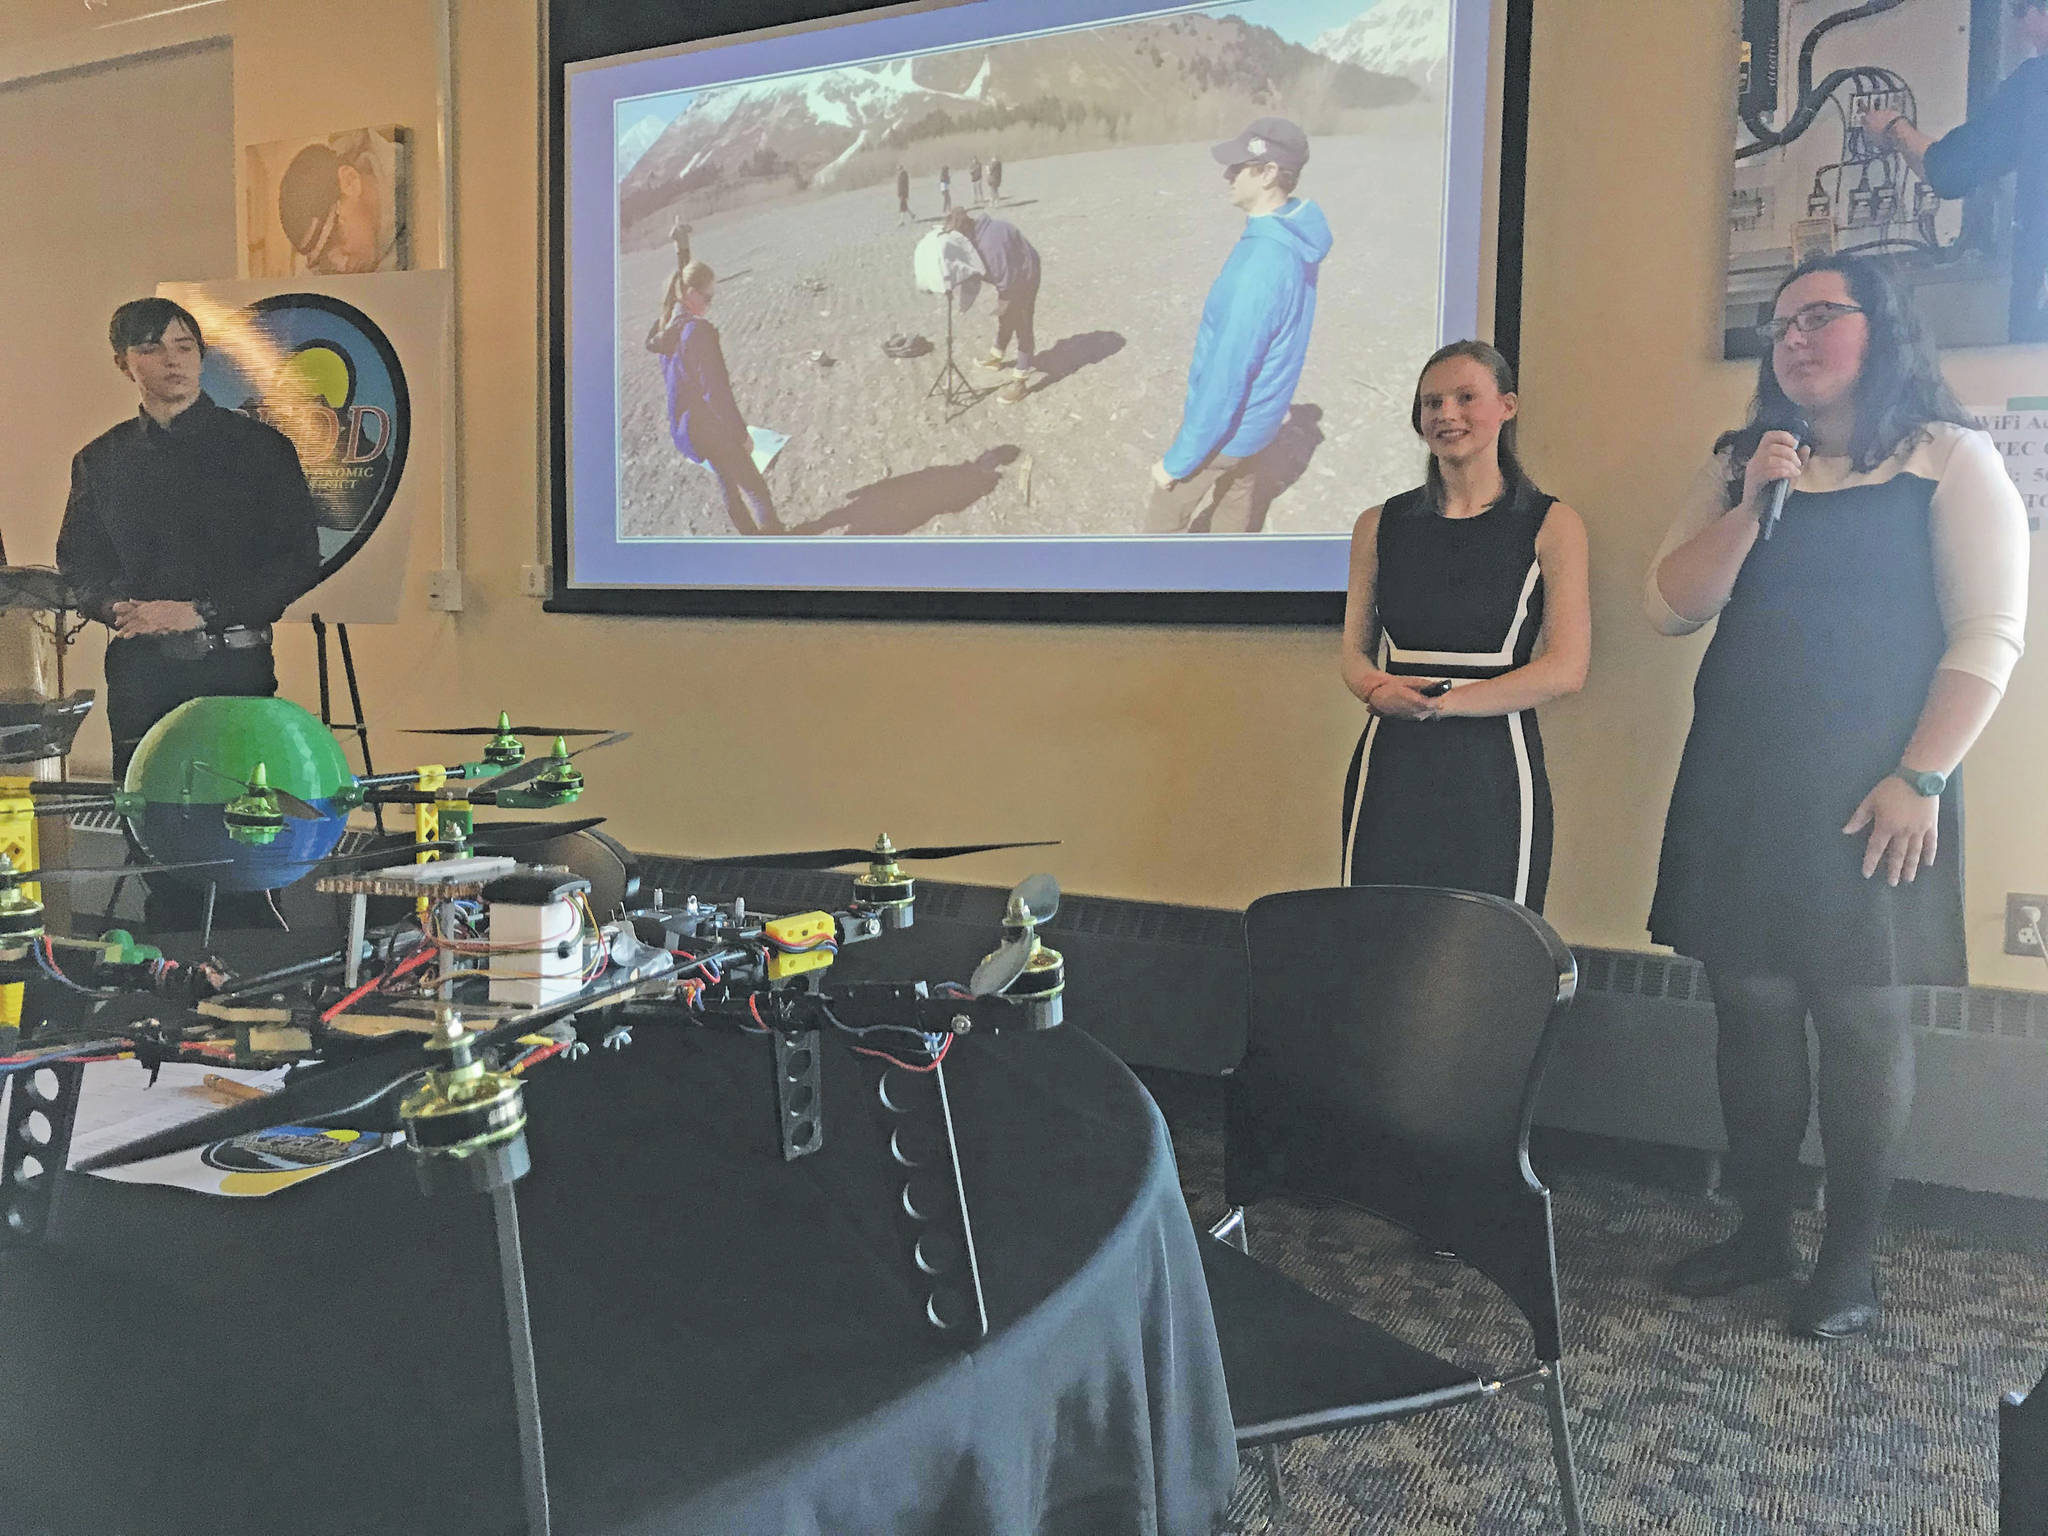 Seward High School students (from left) Tayten Barhaug, Lindy Guernsey and Akilena Veach demonstrate their Caring for the Kenai project, drones to help map the flood planes of Seward, during the Industry Outlook Forum in Seward on Wednesday, Jan. 8, 2019. (Photo by Kat Sorensen/Peninsula Clarion)